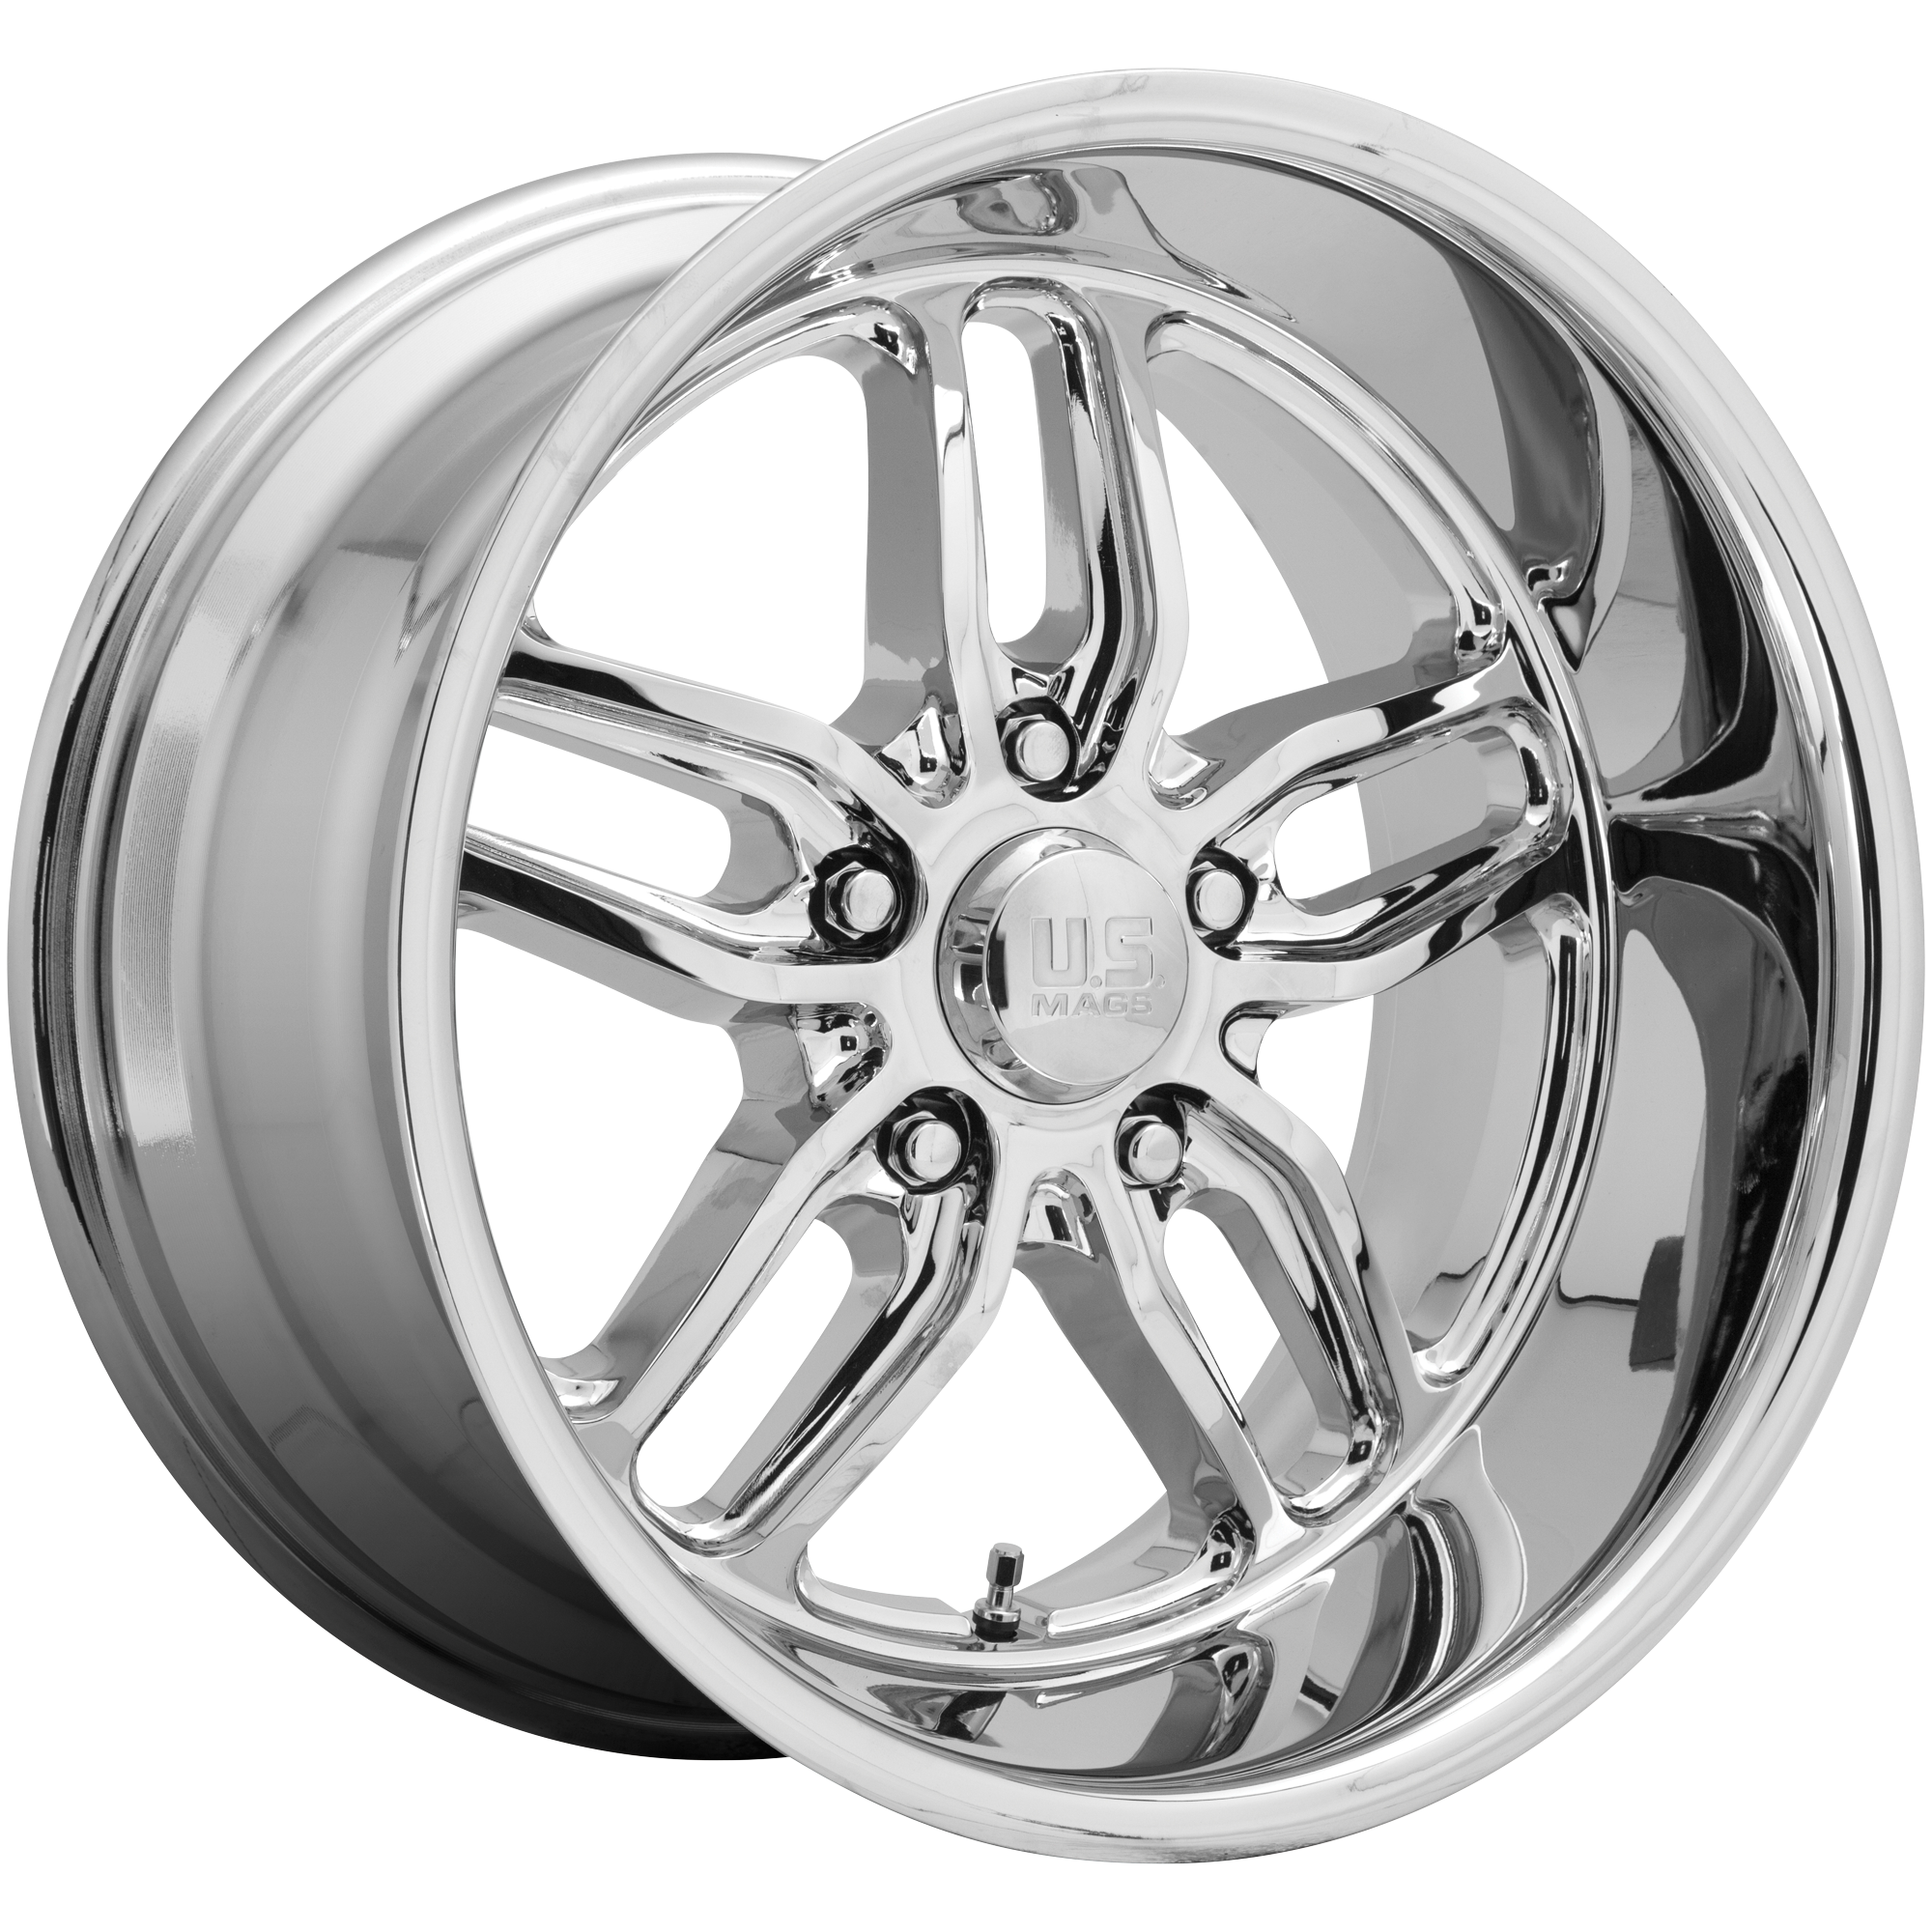 CTEN 22x10.5 5x127.00 CHROME PLATED (1 mm) - Tires and Engine Performance